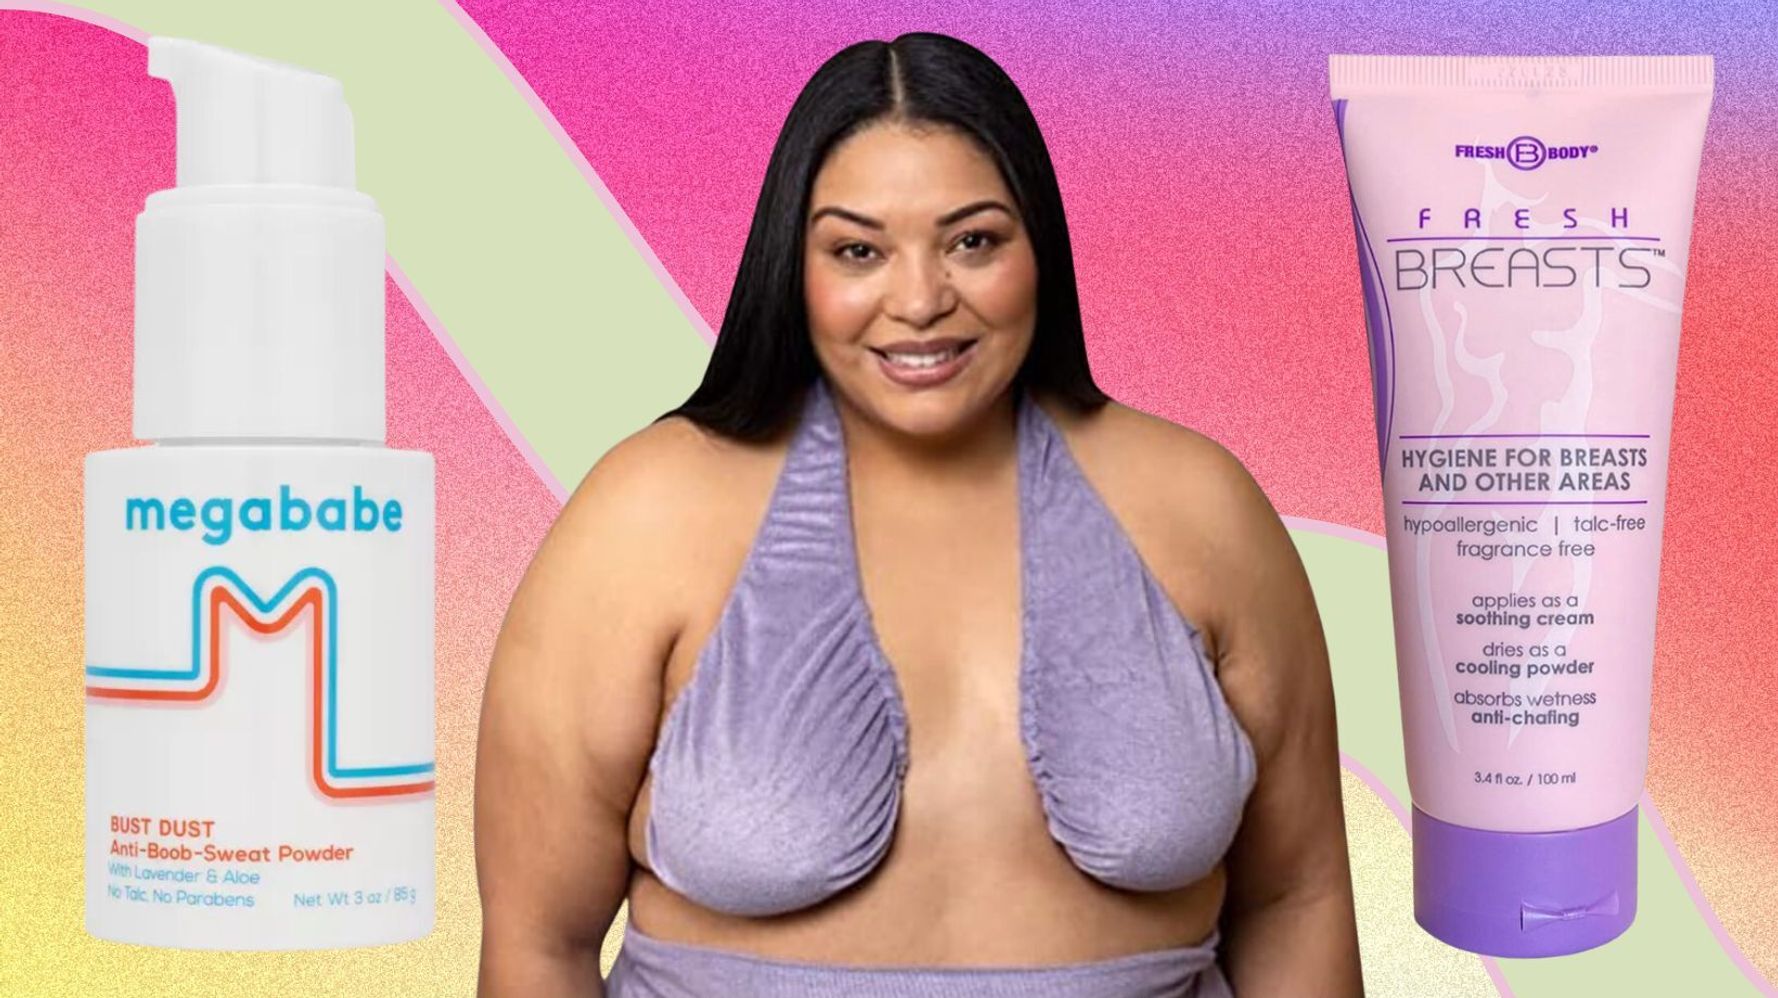 15 ingenious things you can do with big boobs (other than the obvious)